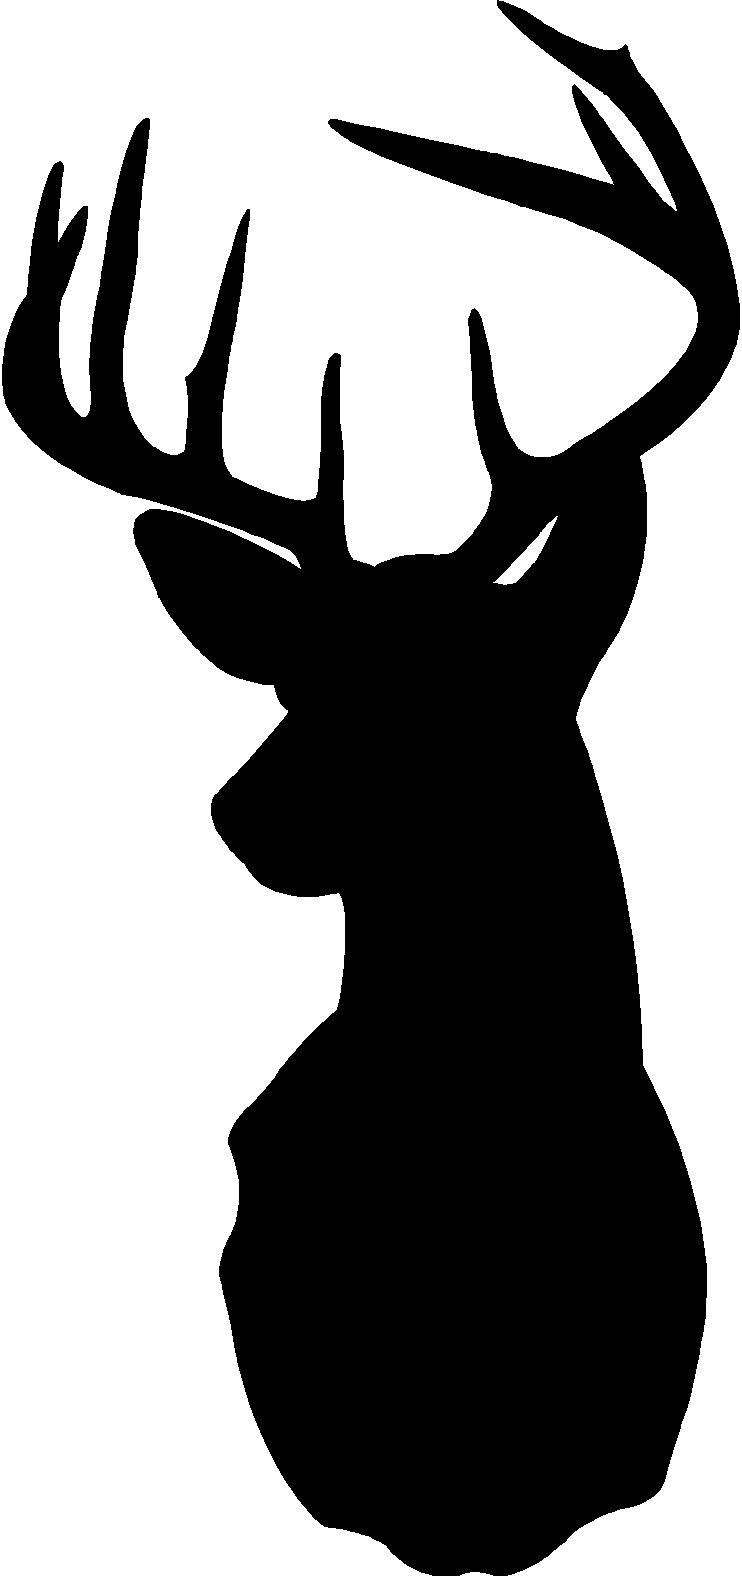 Deer Silhouette - Cliparts.co